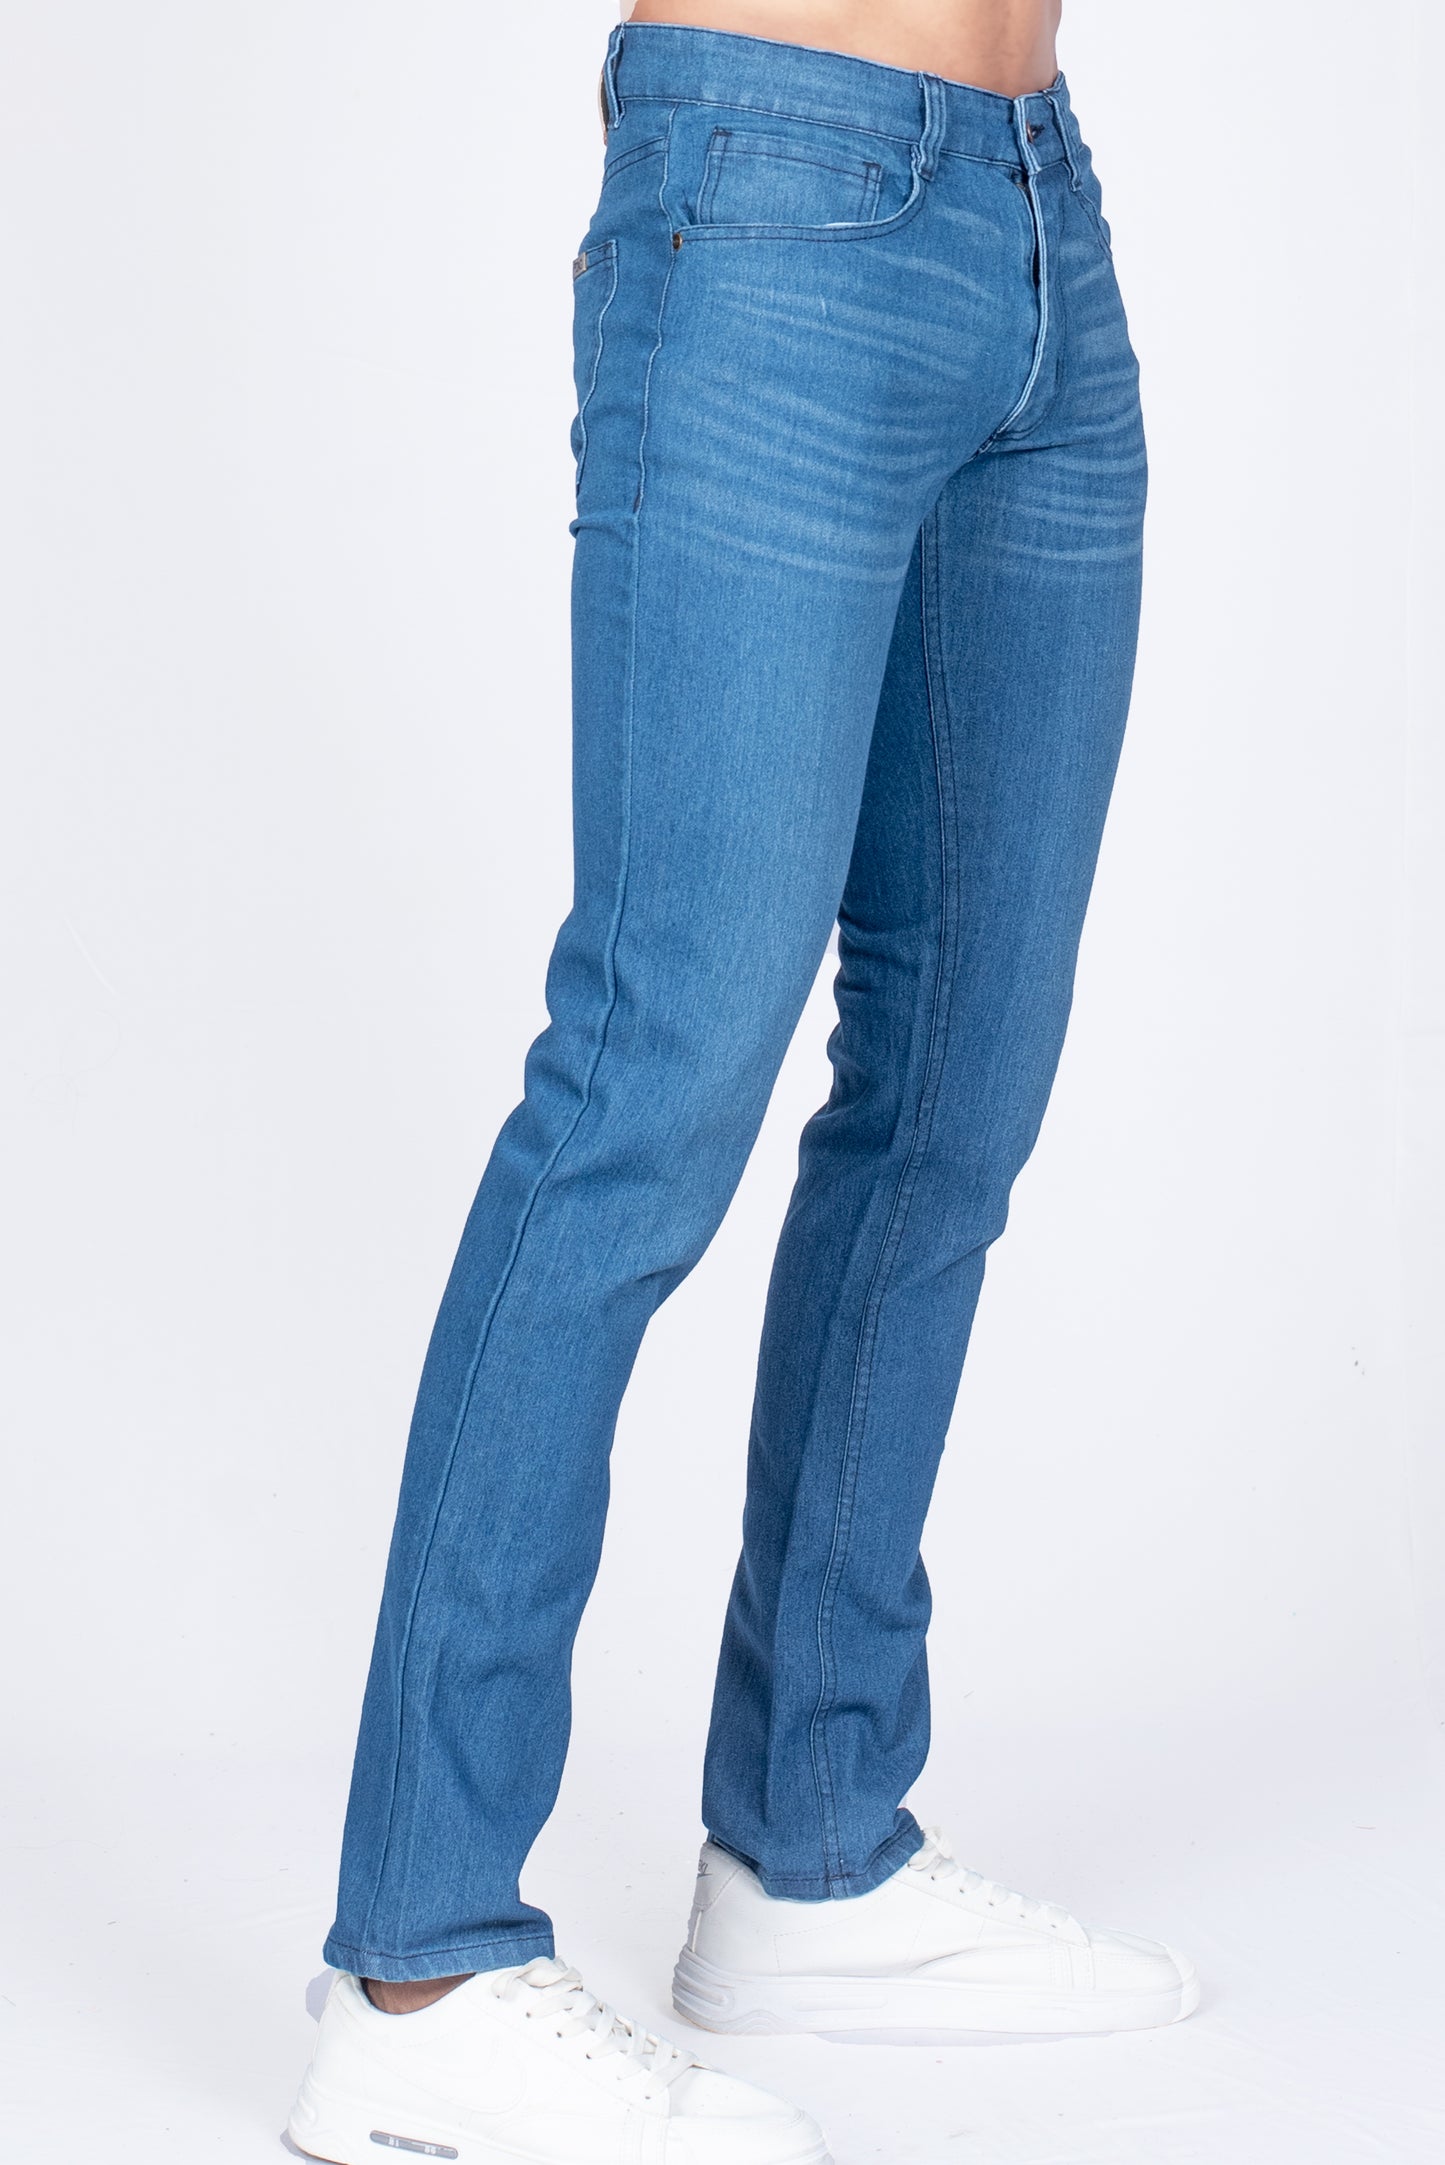 Men's Jeans - Light Blue Wash with Whiskers